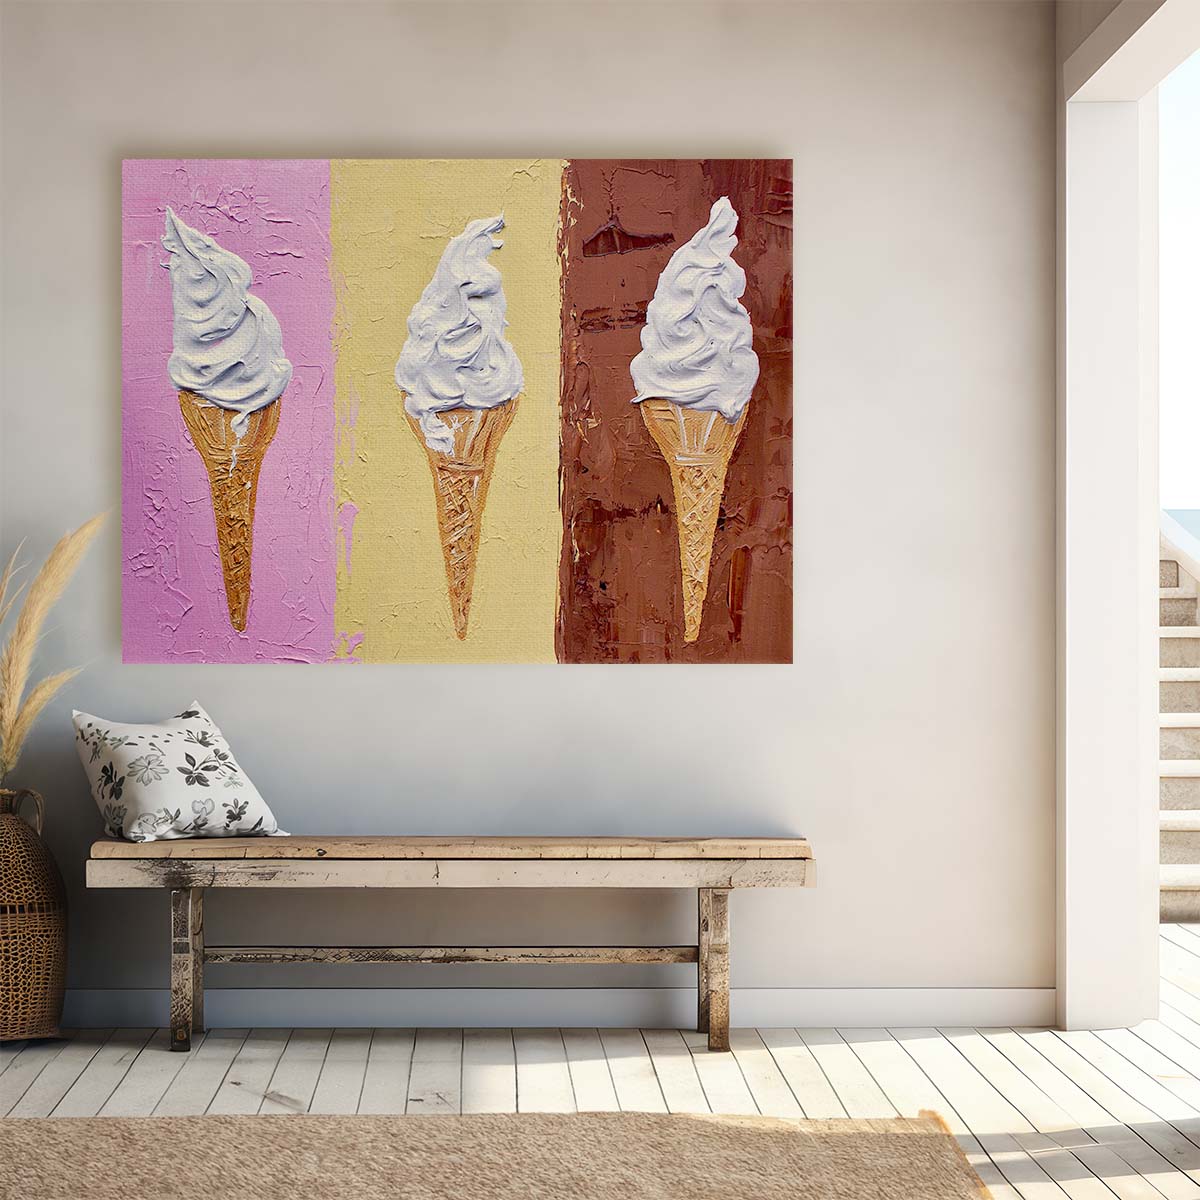 Colorful Ice Cream Cones Dessert Kitchen Wall Art by Luxuriance Designs. Made in USA.